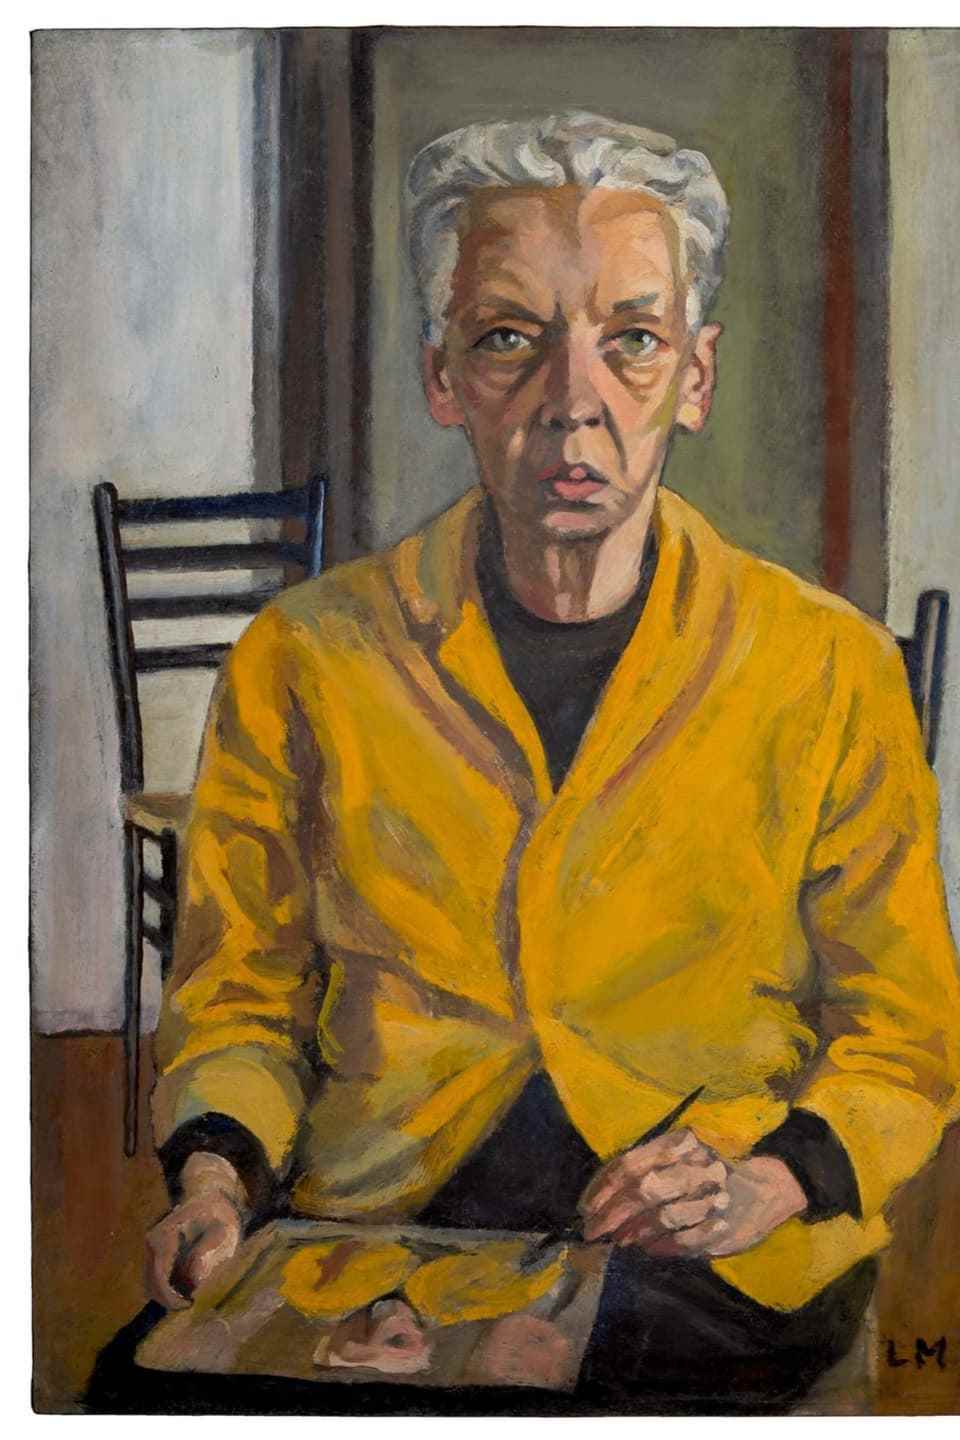 In 1976 Liselotte Moser painted her last self-portrait in oil on canvas.